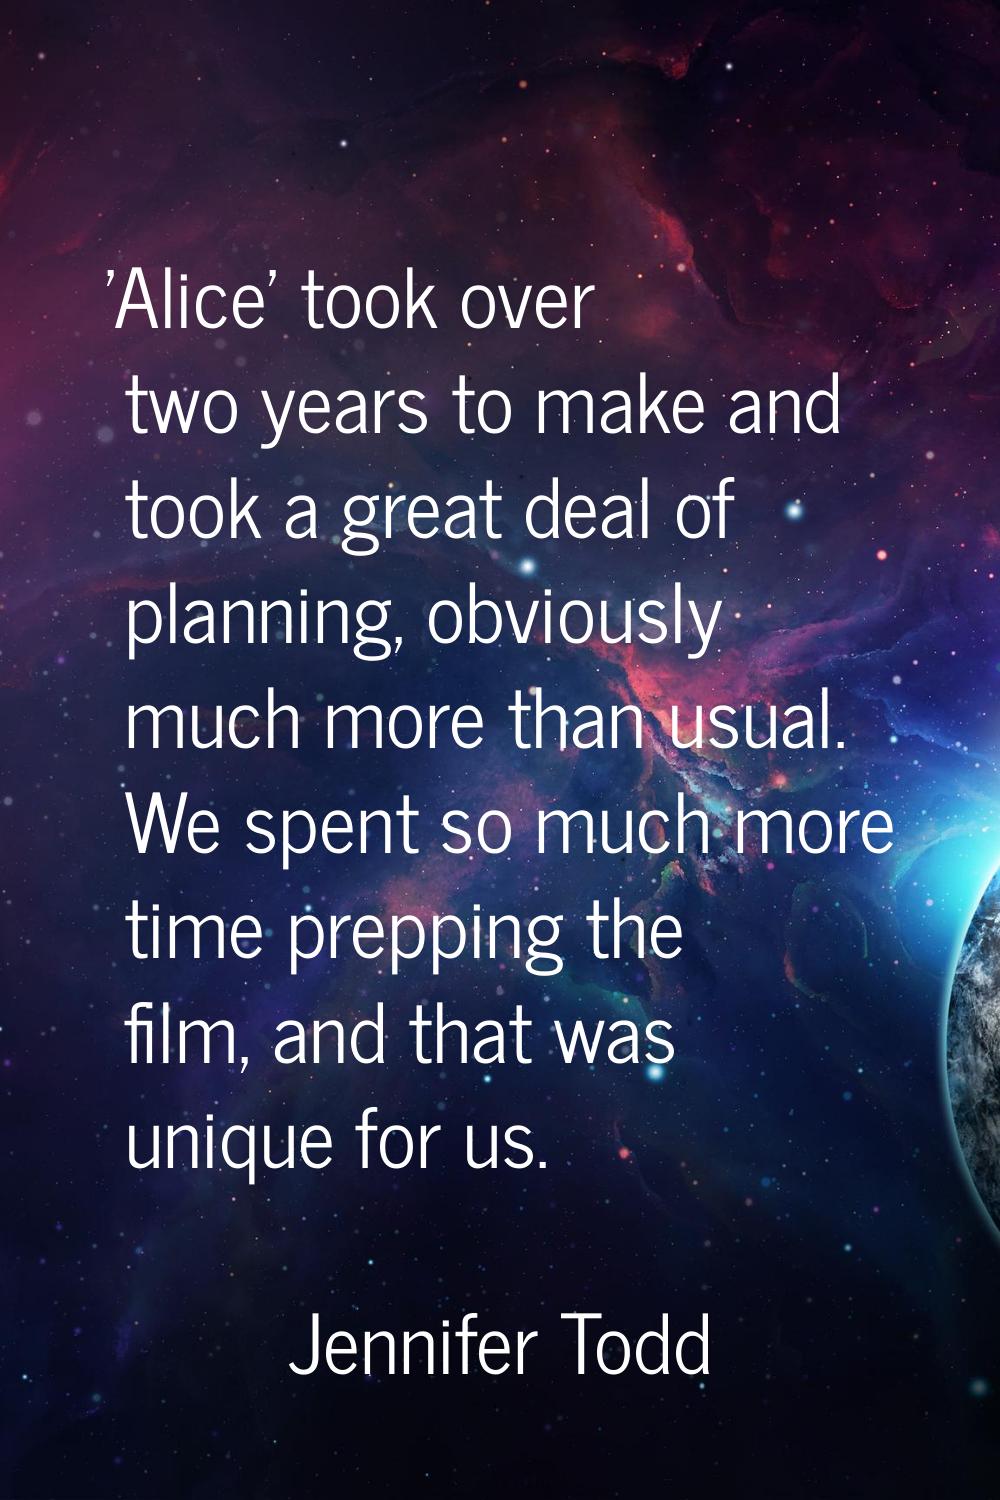 'Alice' took over two years to make and took a great deal of planning, obviously much more than usu